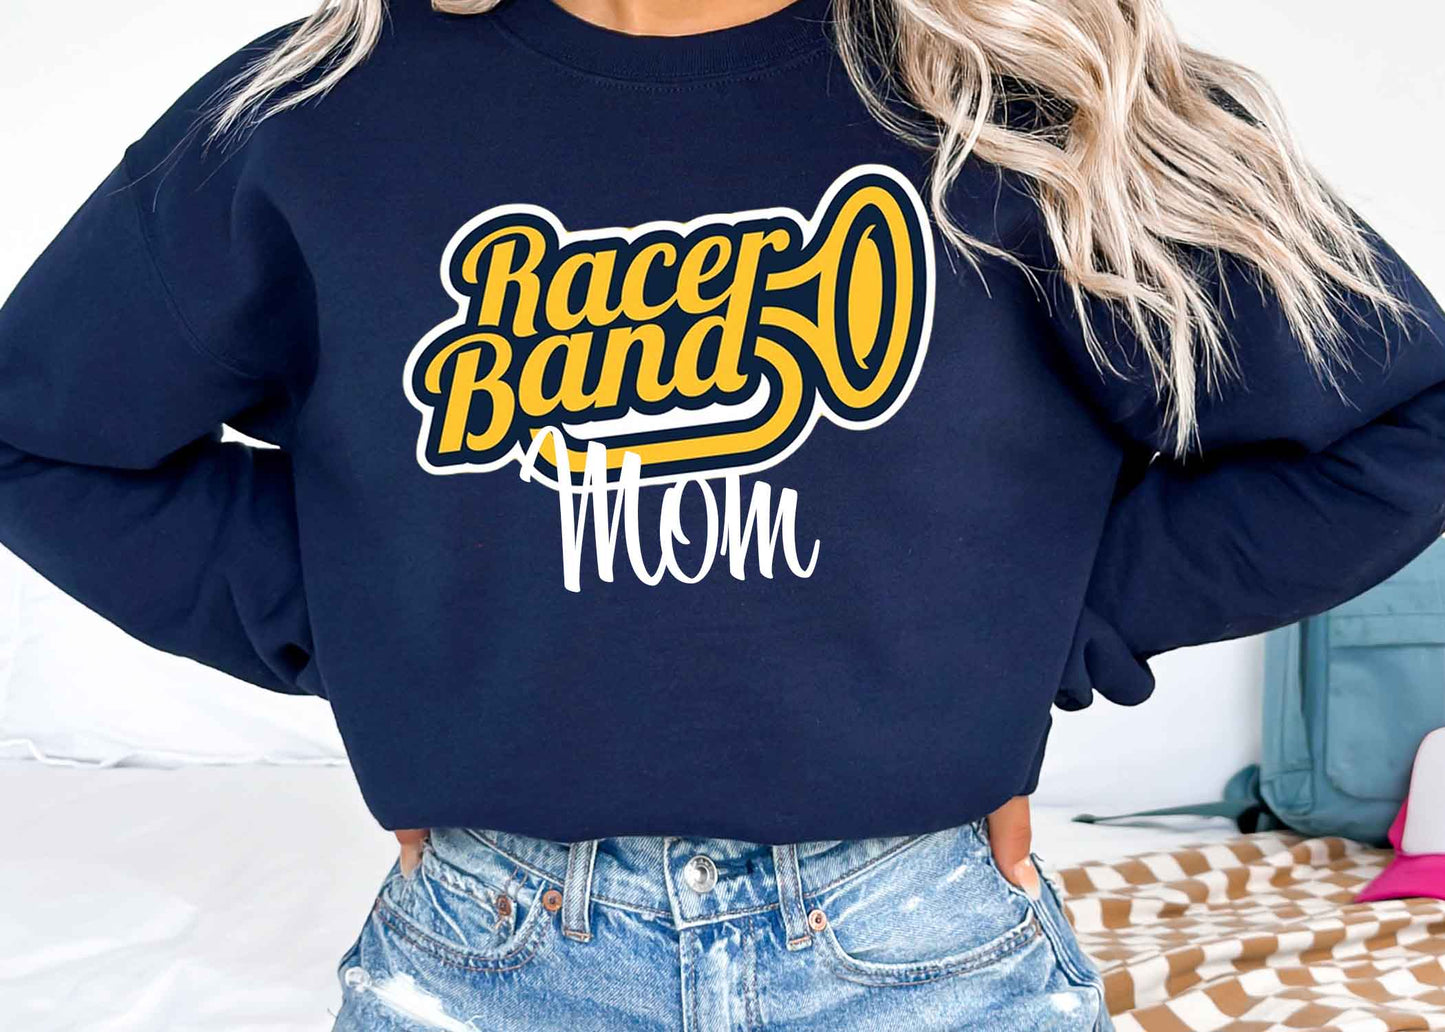 Murray state racer band